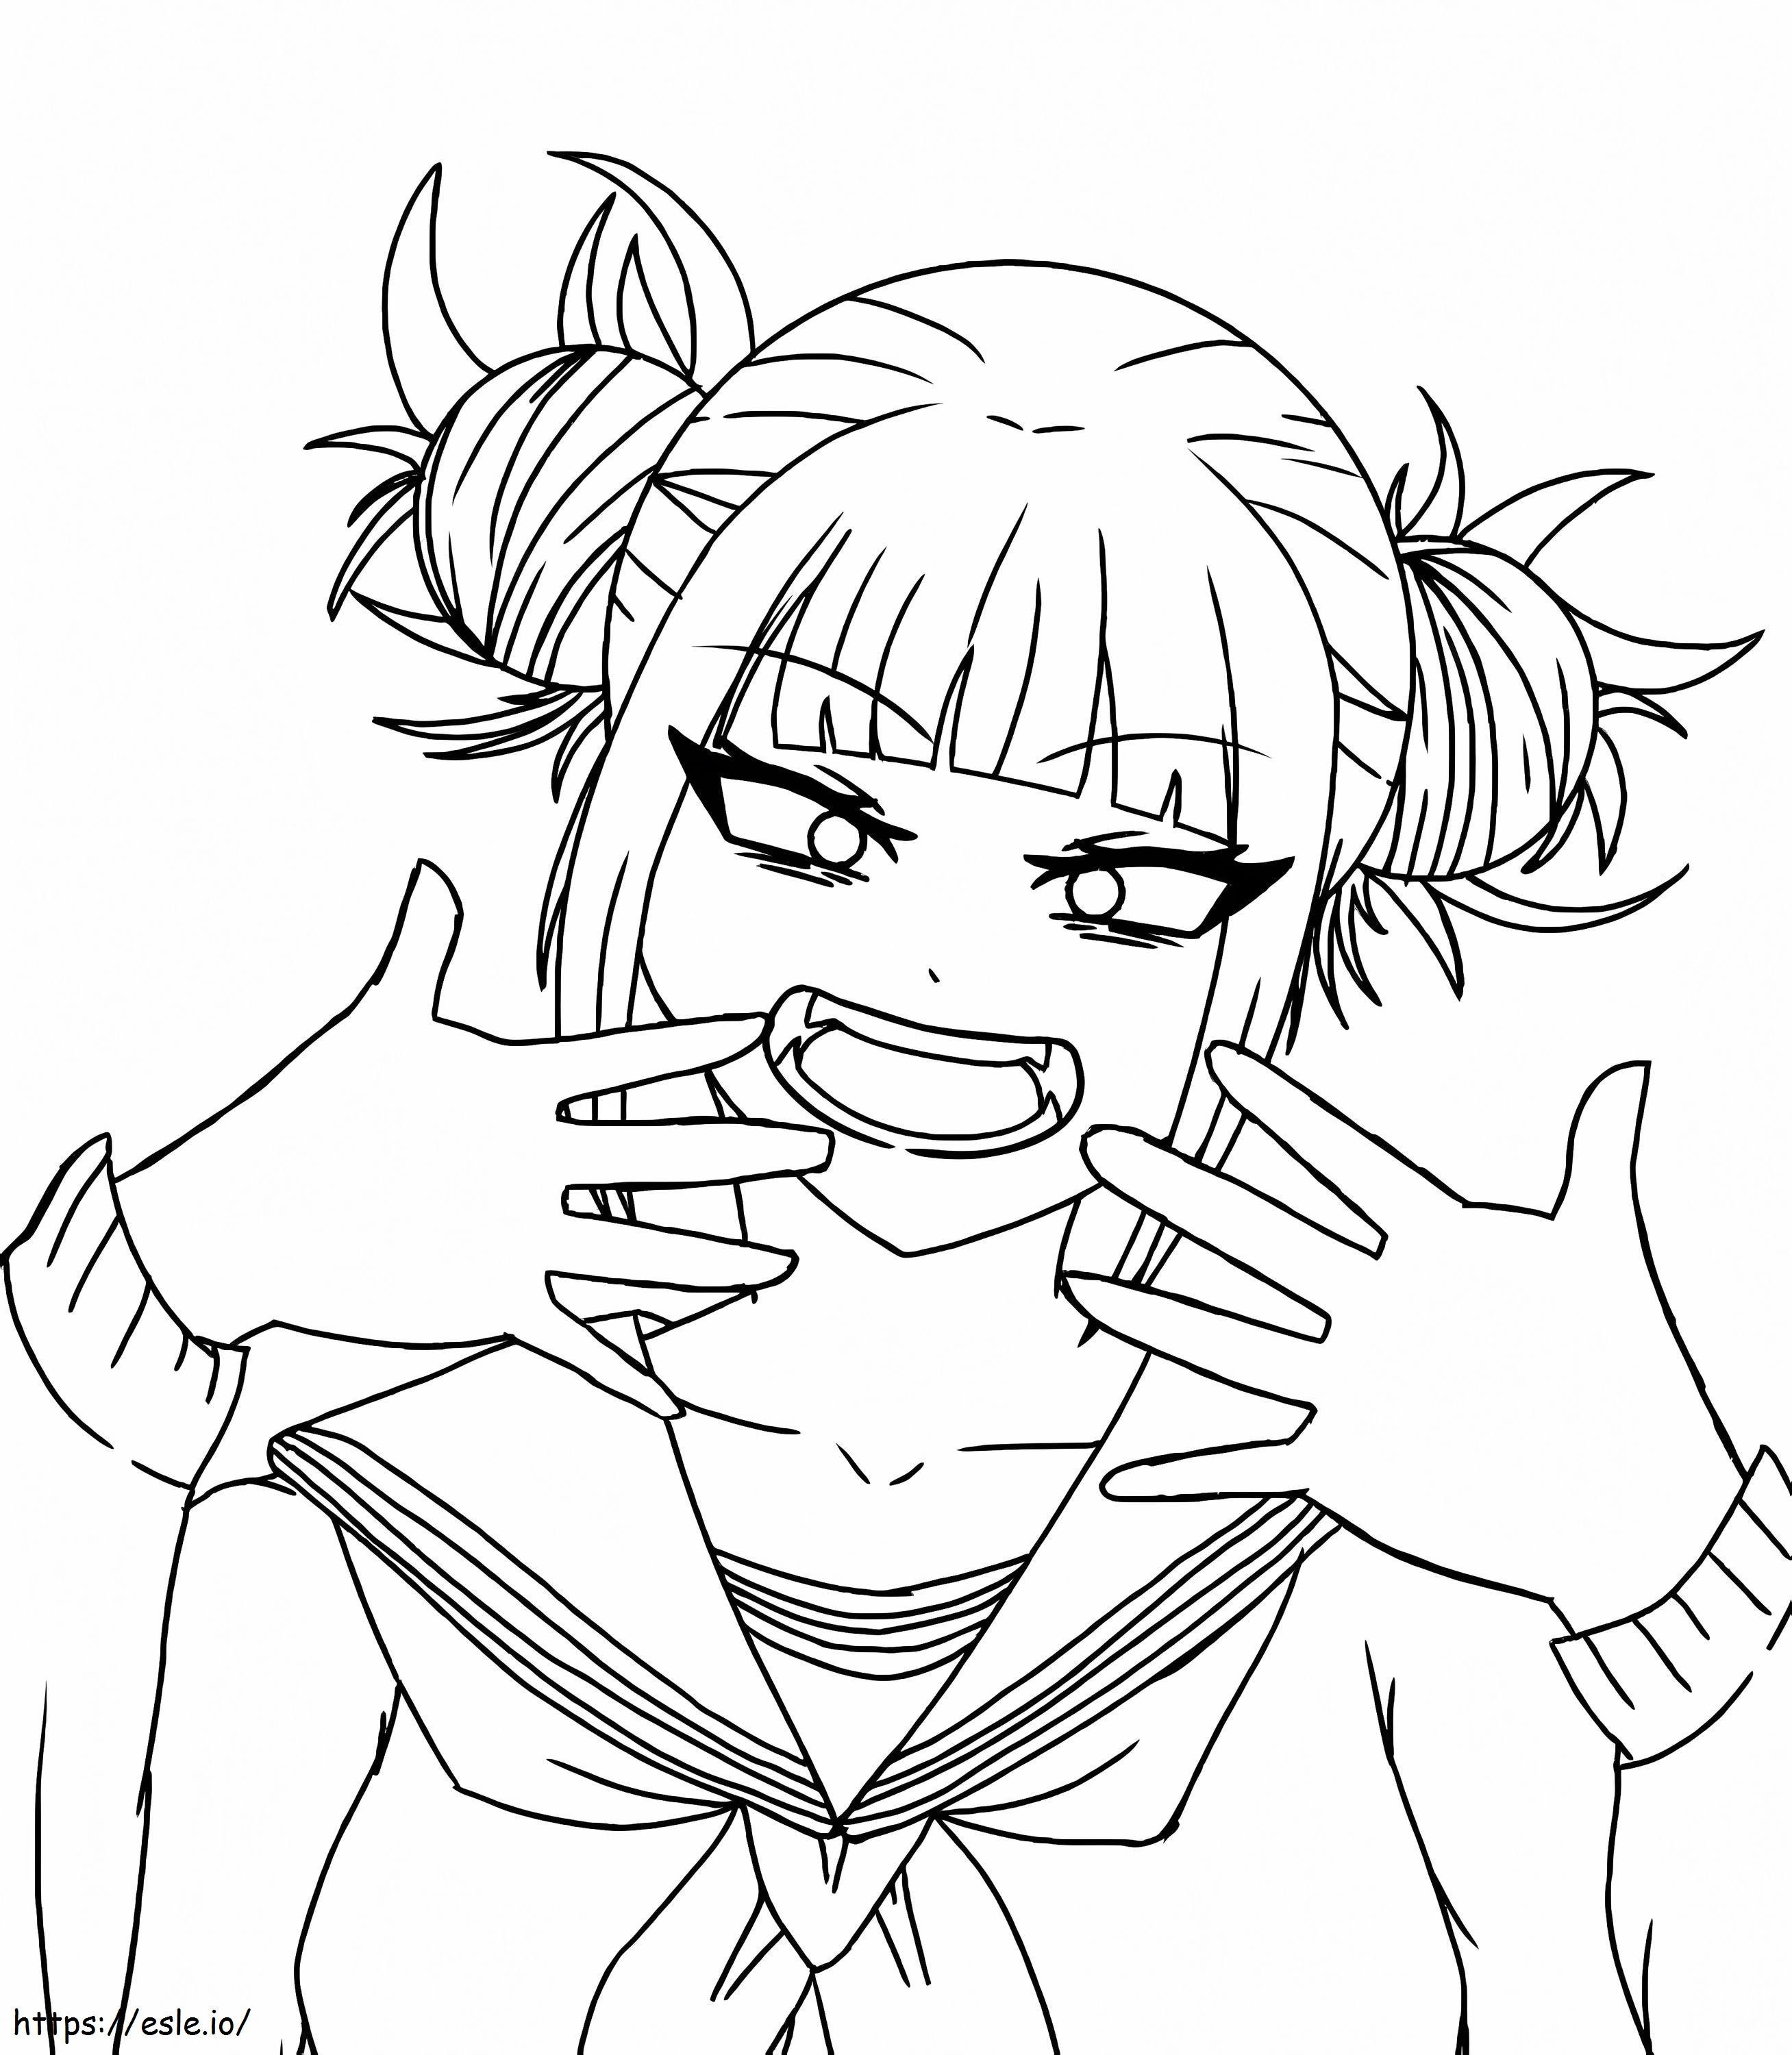 Toga Himiko Coloring Page